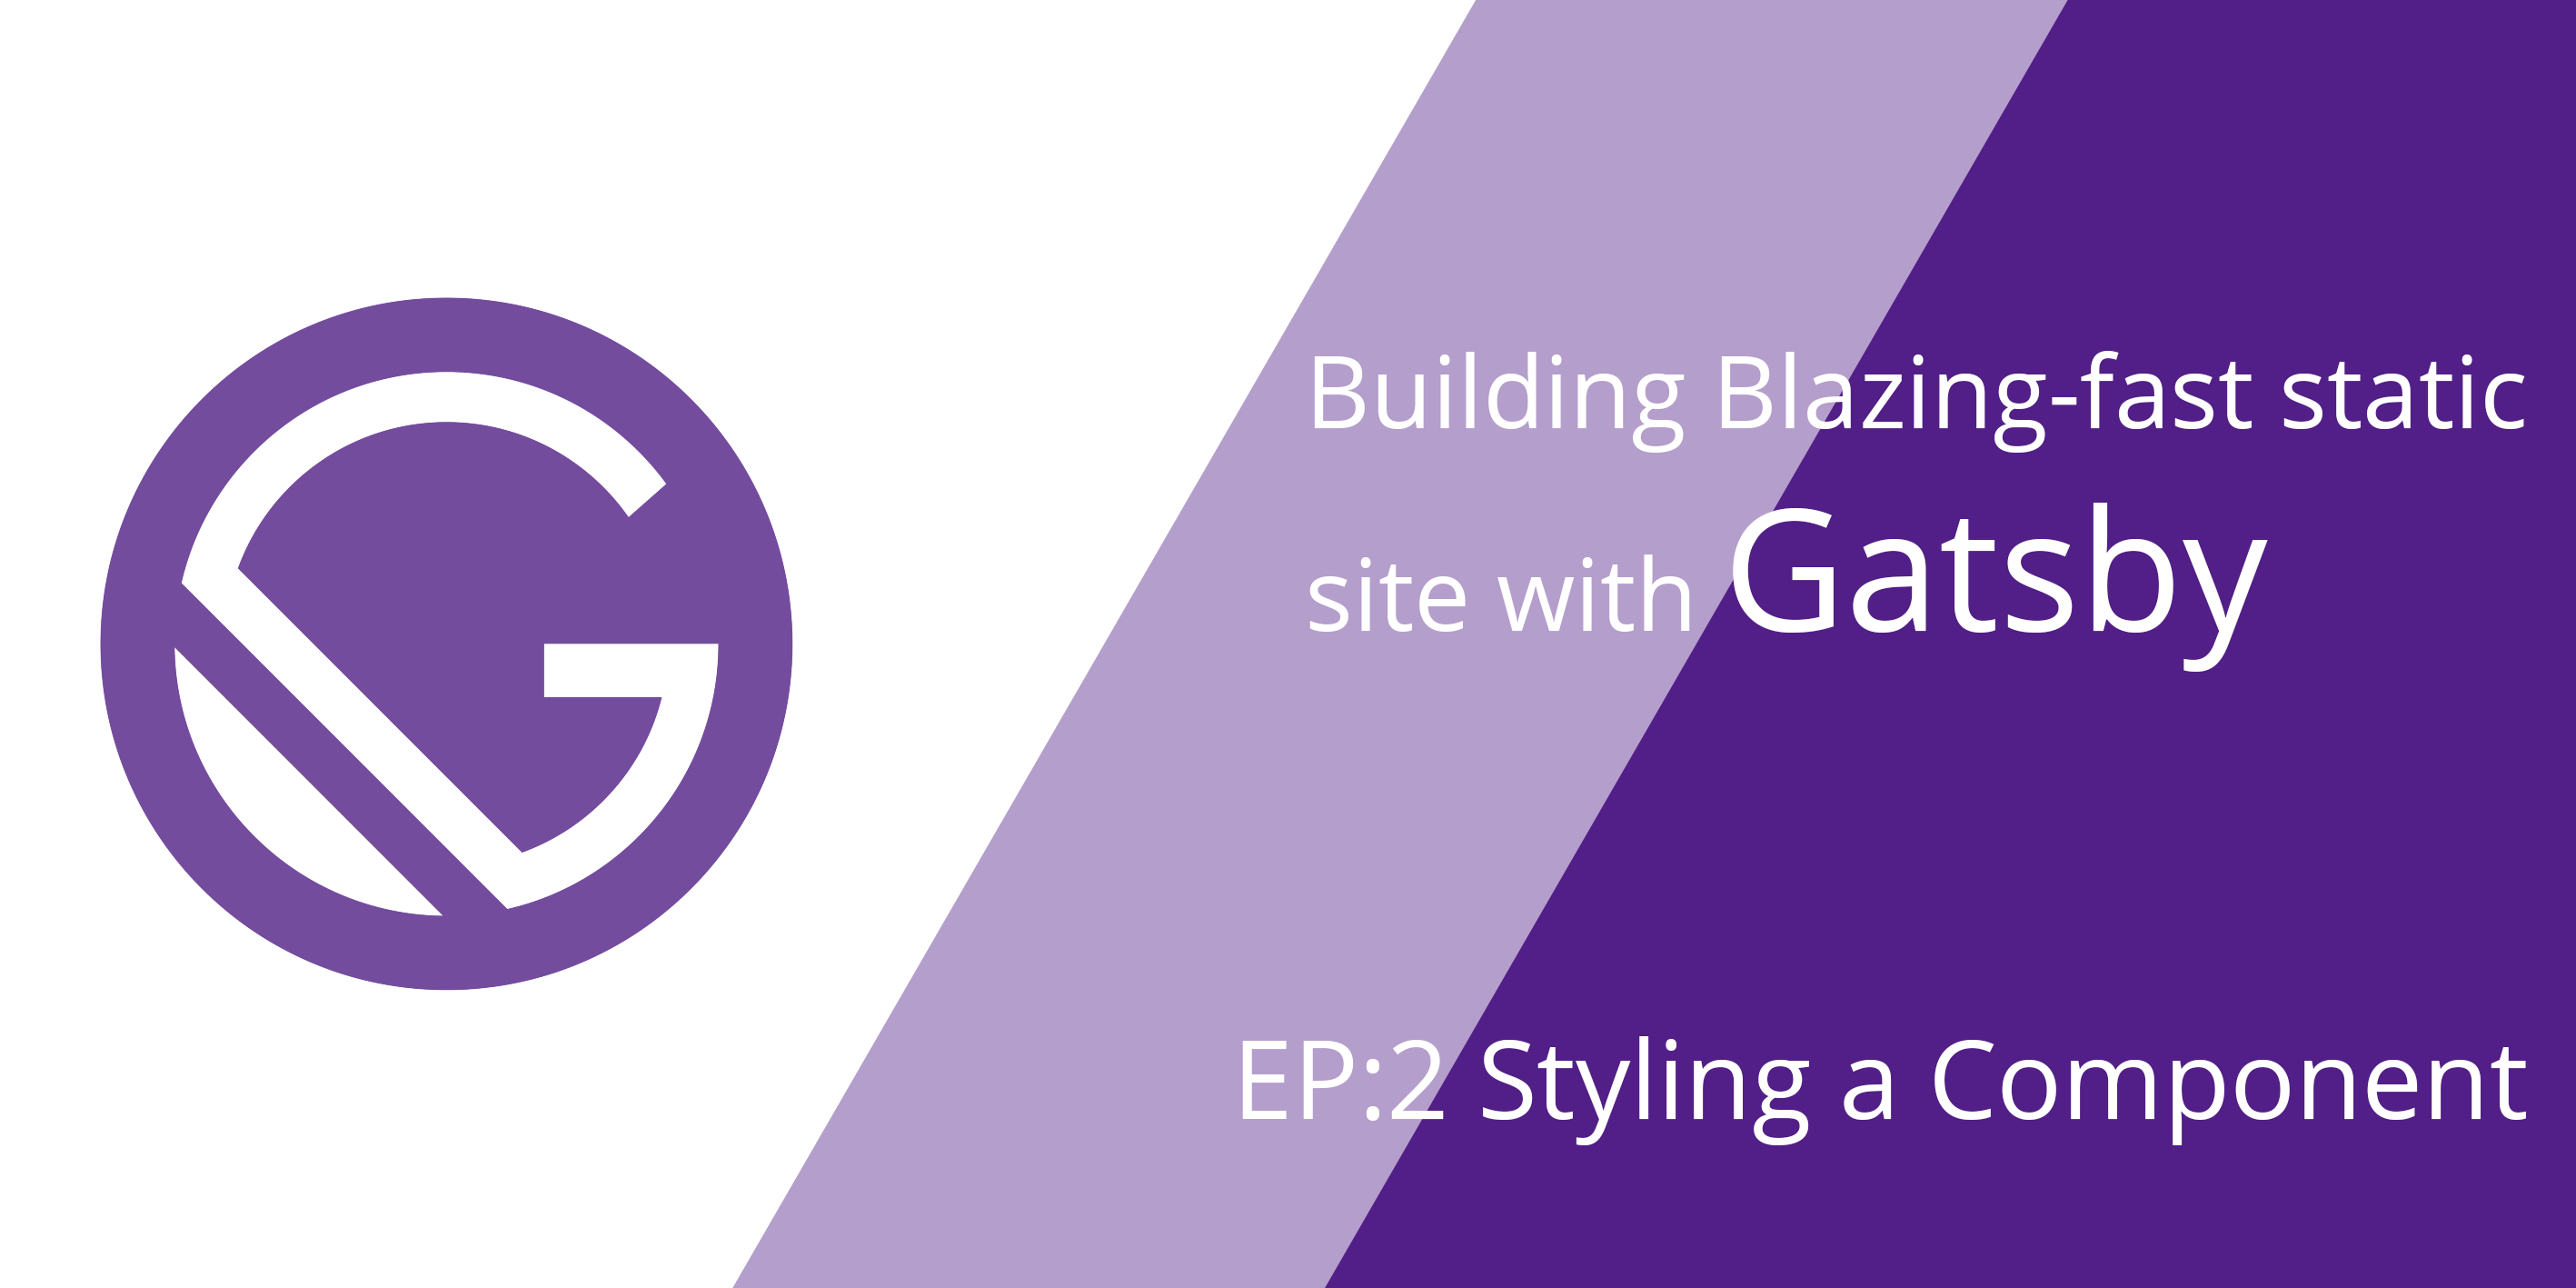 Building Blazing-fast static site with Gatsby